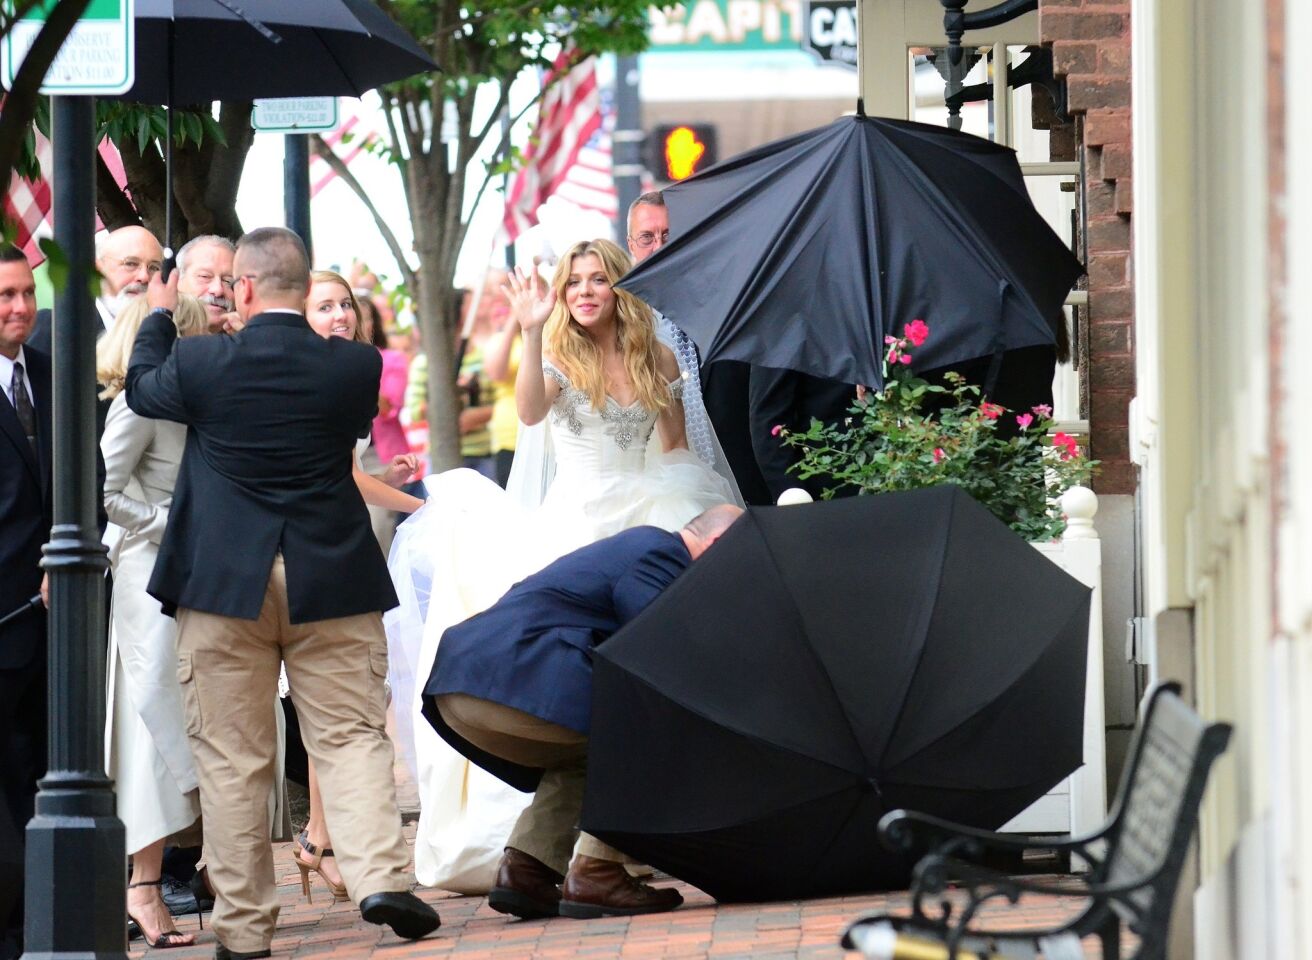 The Band Perry musician wed the baseball player on June 12 at First Presbyterian Church in Greenville, Tenn. Her brothers Neil and Reid and fellow country stars Miranda Lambert, Blake Shelton and Carrie Underwood witnessed the nuptials.